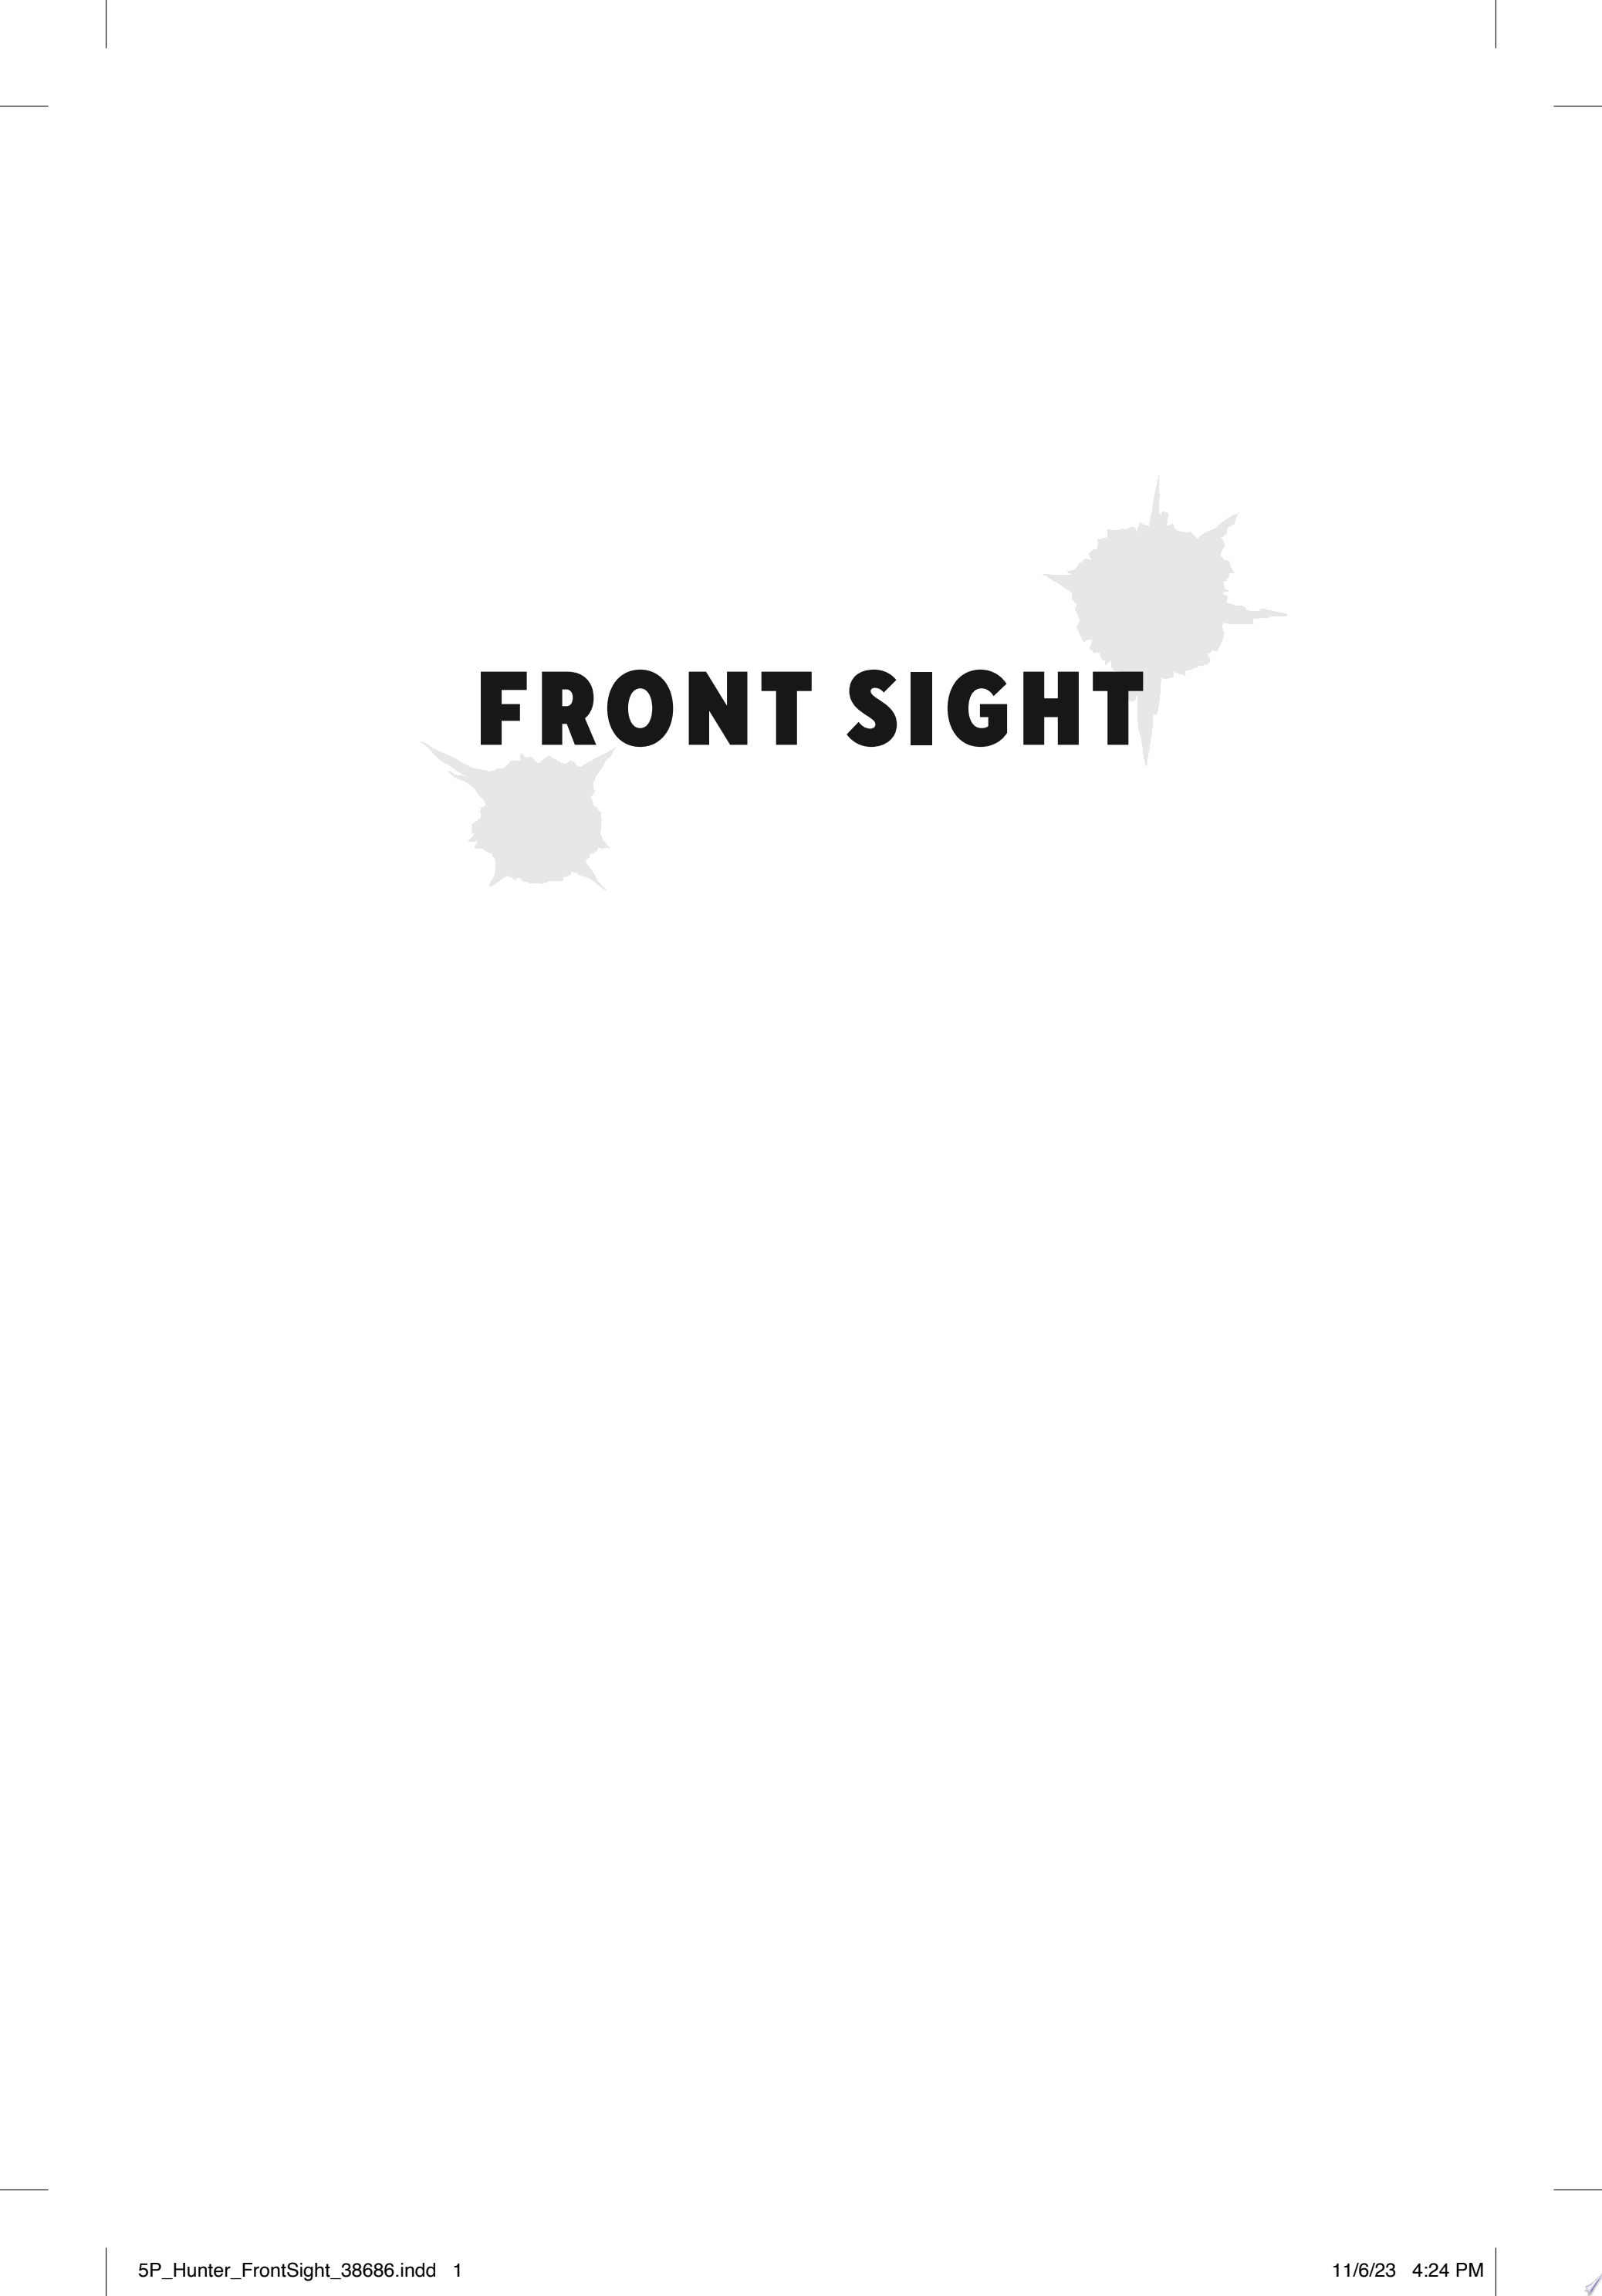 Image for "Front Sight"